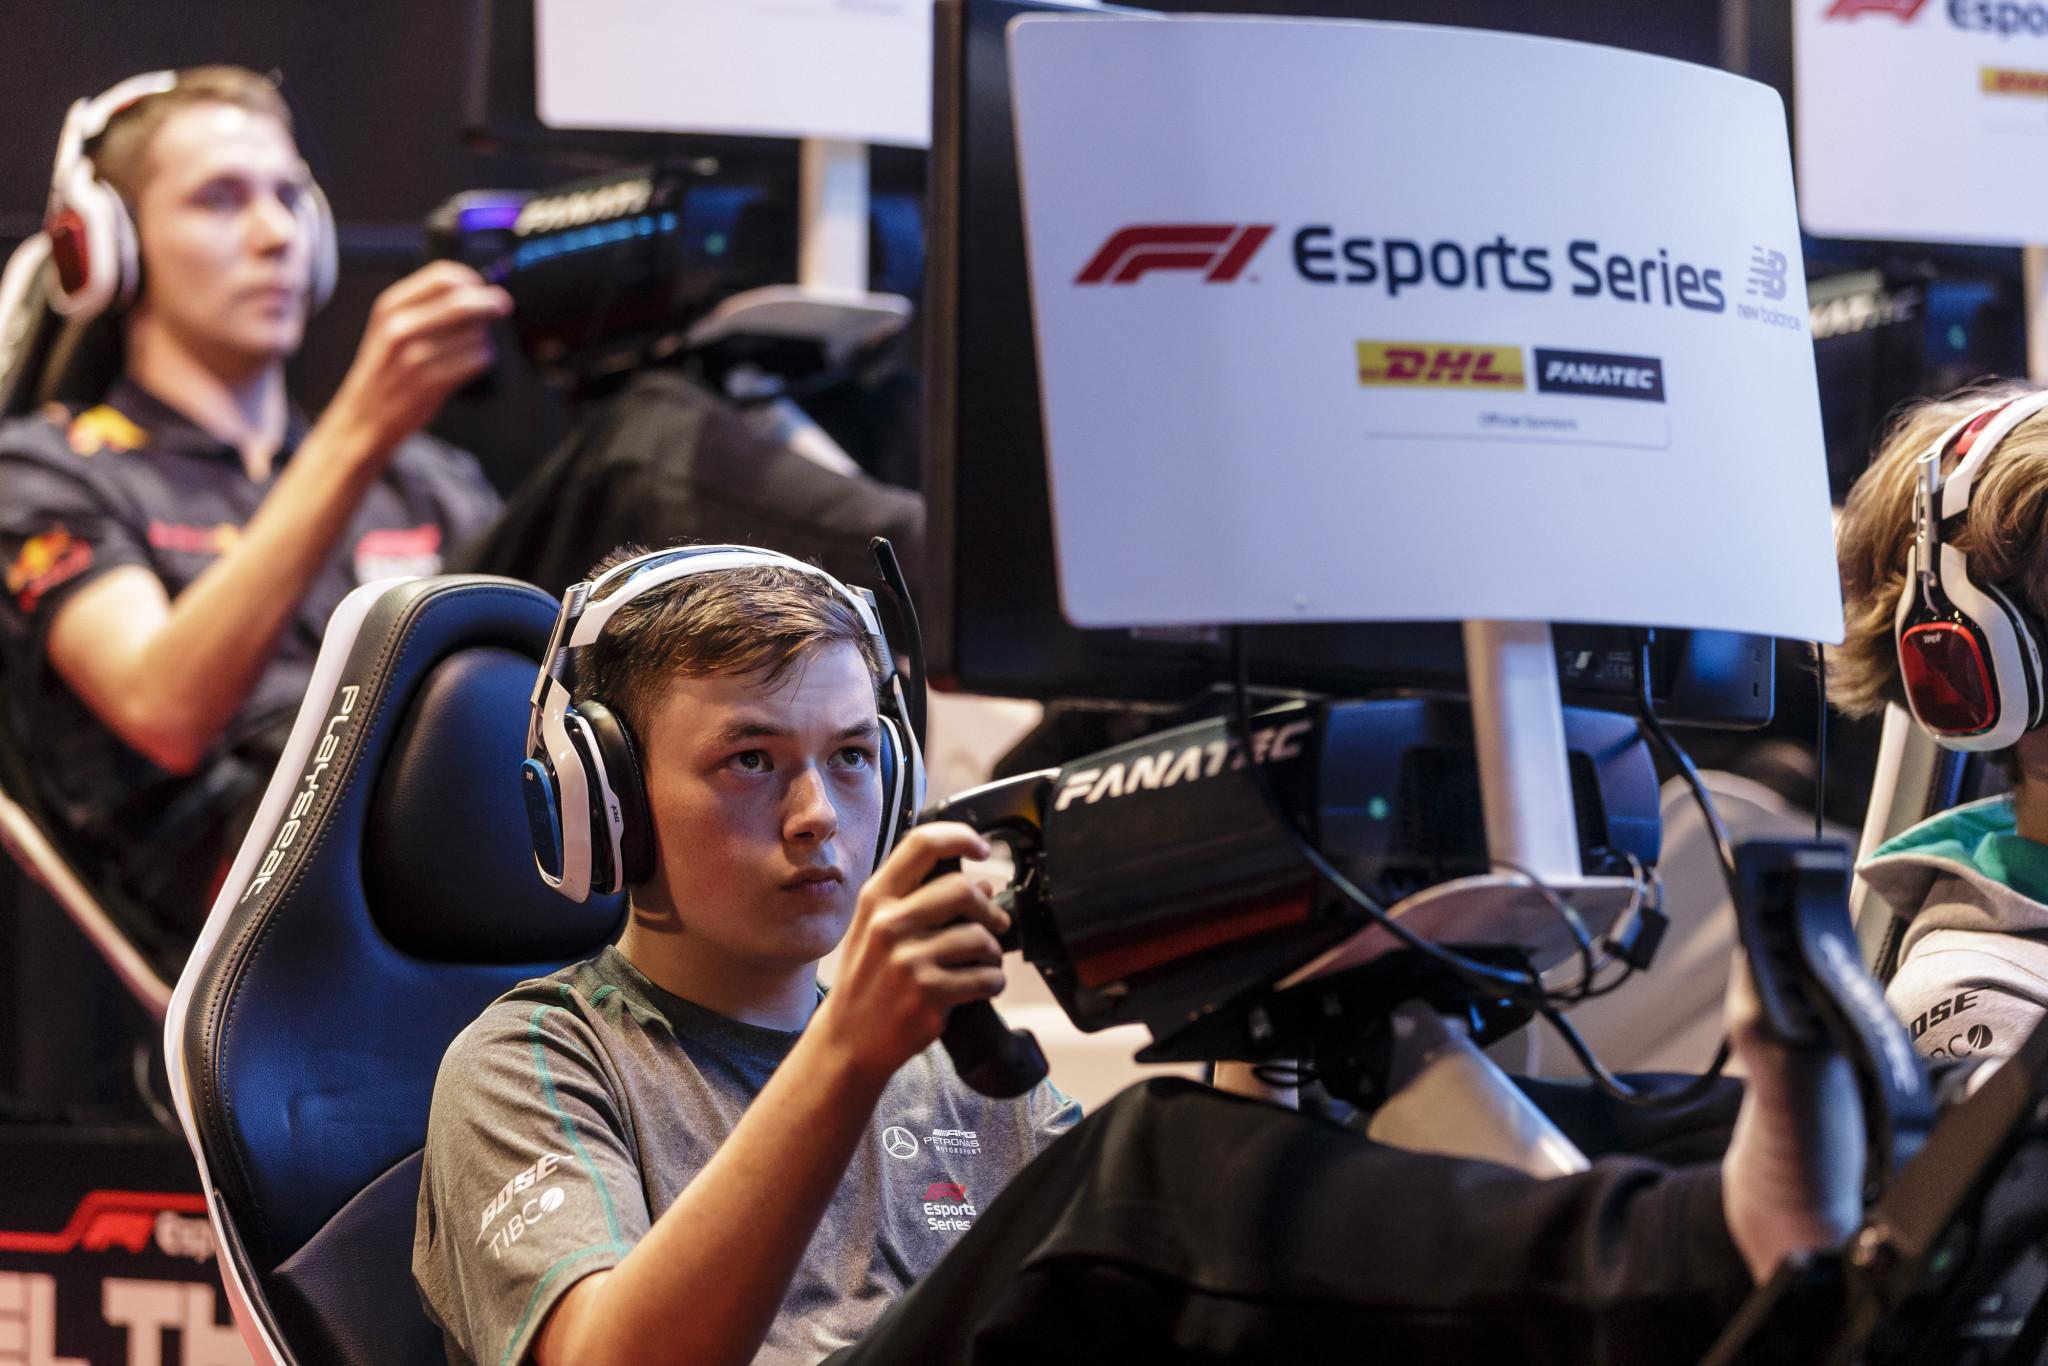 F1 Esports Series Pro Championship returns in 2022 with new four-week format